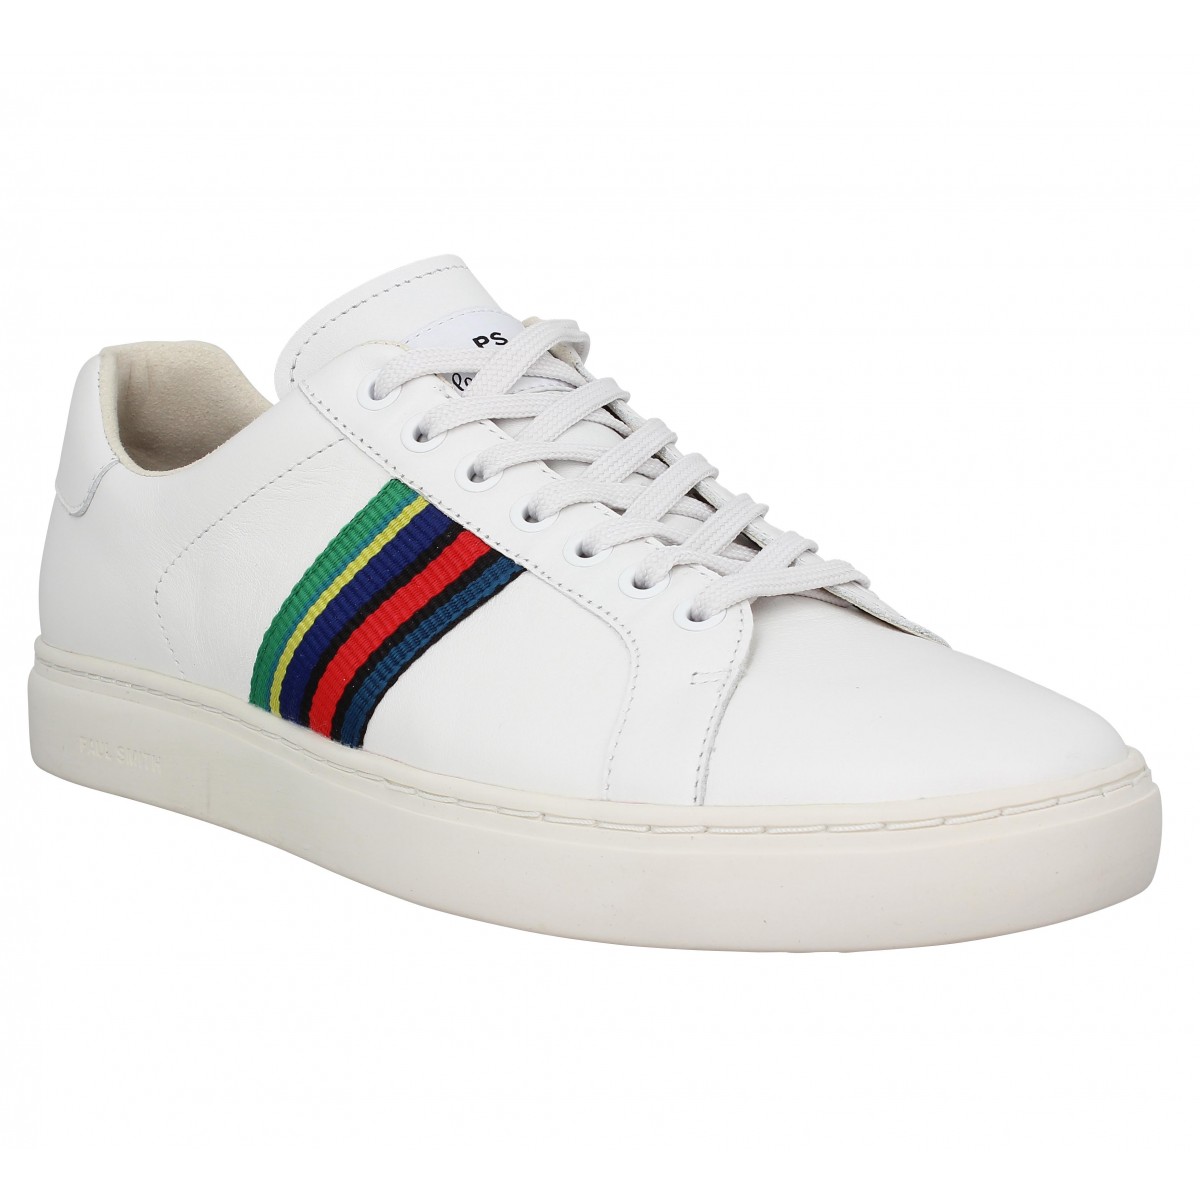 Paul smith lapin cuir homme blanc homme | Fanny chaussures